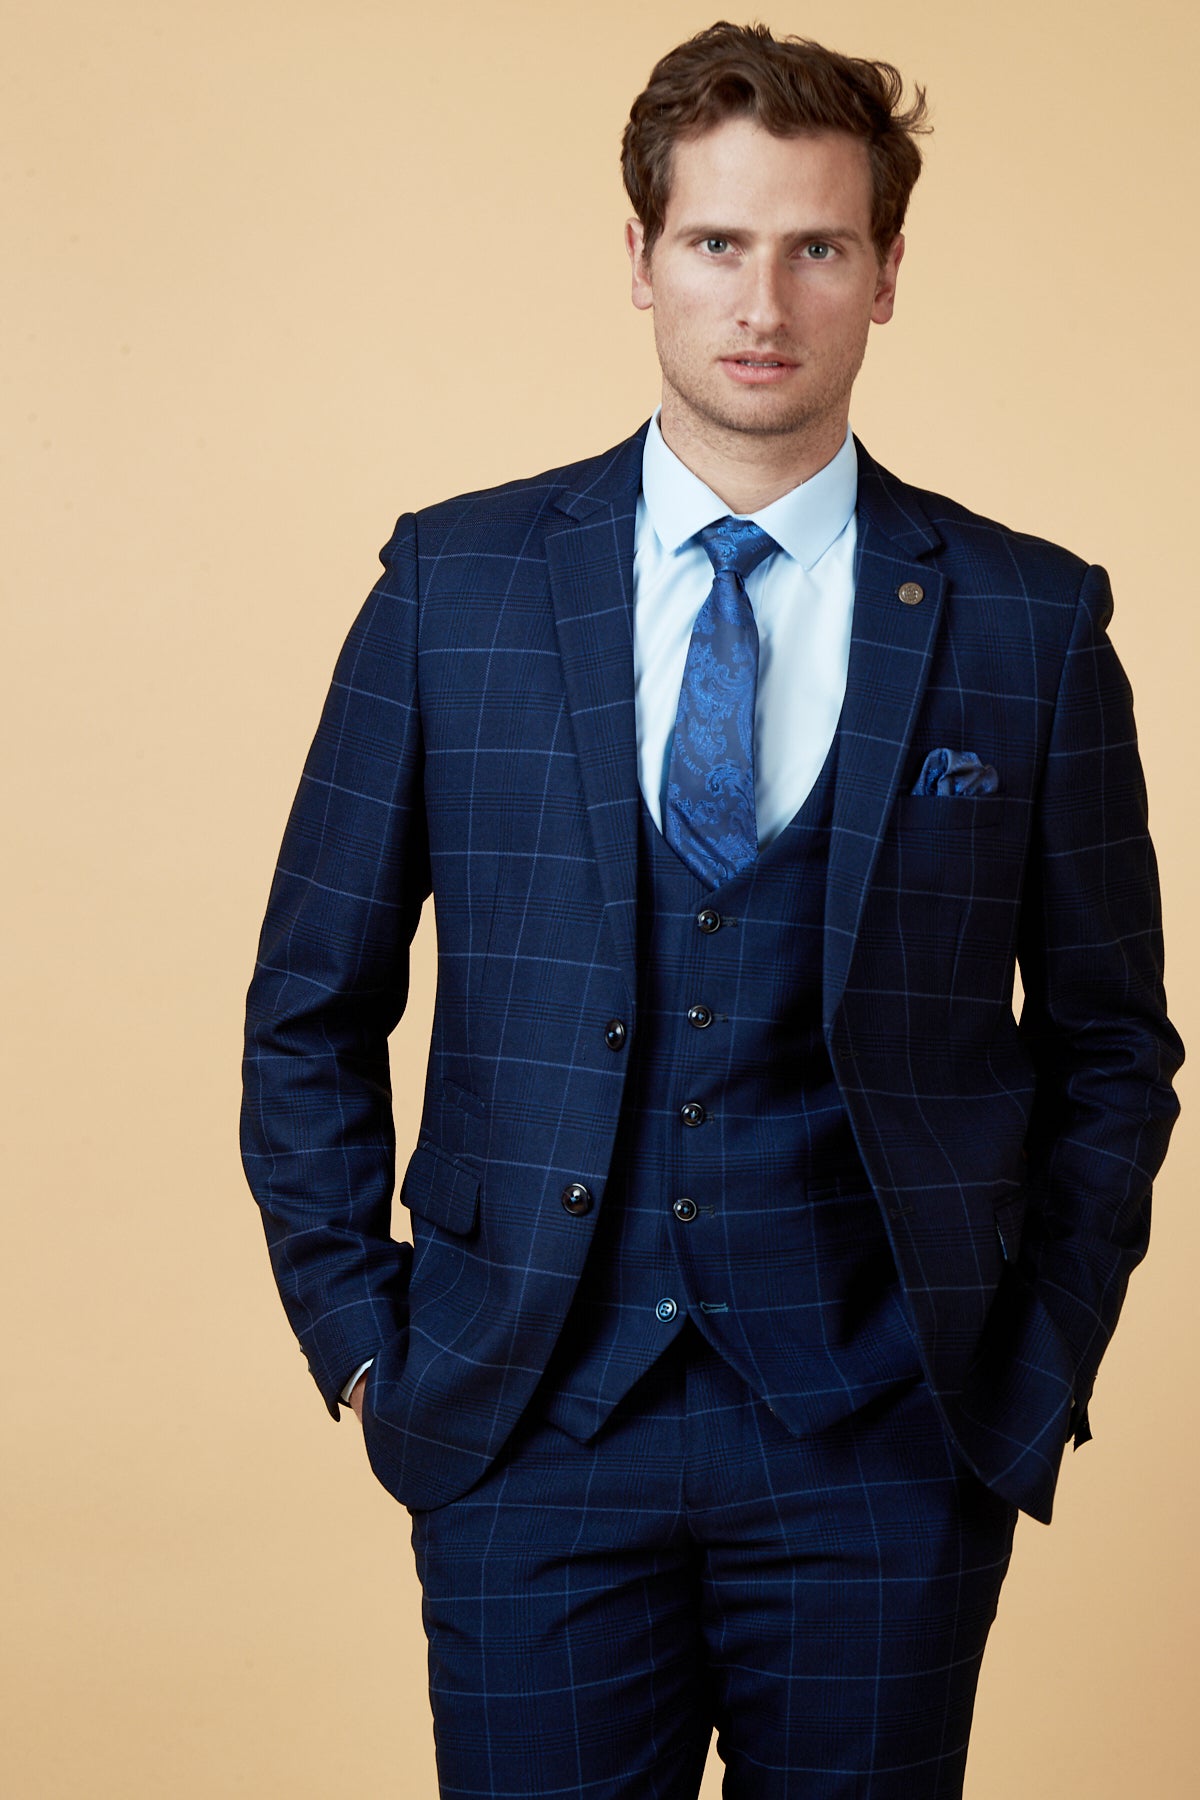 The Cardiff City F.C. Collection - Edinson Navy Sky Check Suit as worn by Joe Ralls